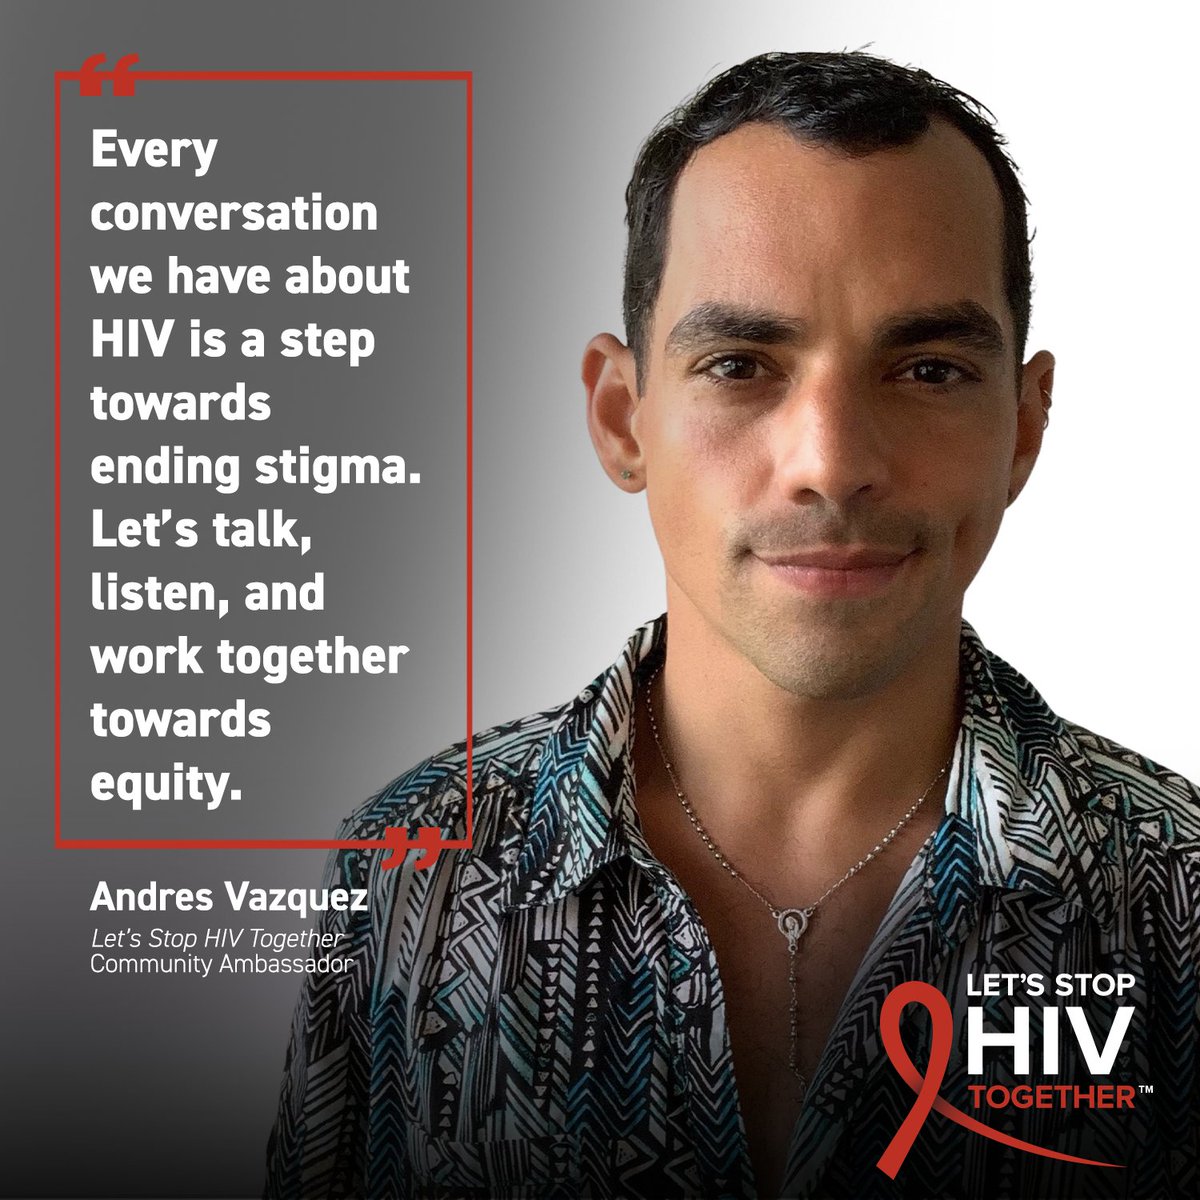 Meet today’s Let’s #StopHIVTogether Ambassador: Andres Vazquez! 👋

Andres encourages everyone to do their part by sharing facts about PrEP, PEP, & HIV treatment. Together we can help #StopHIVStigma & increase HIV awareness in our communities.

#NLAAD #TogetherAmbassadorSpotlight